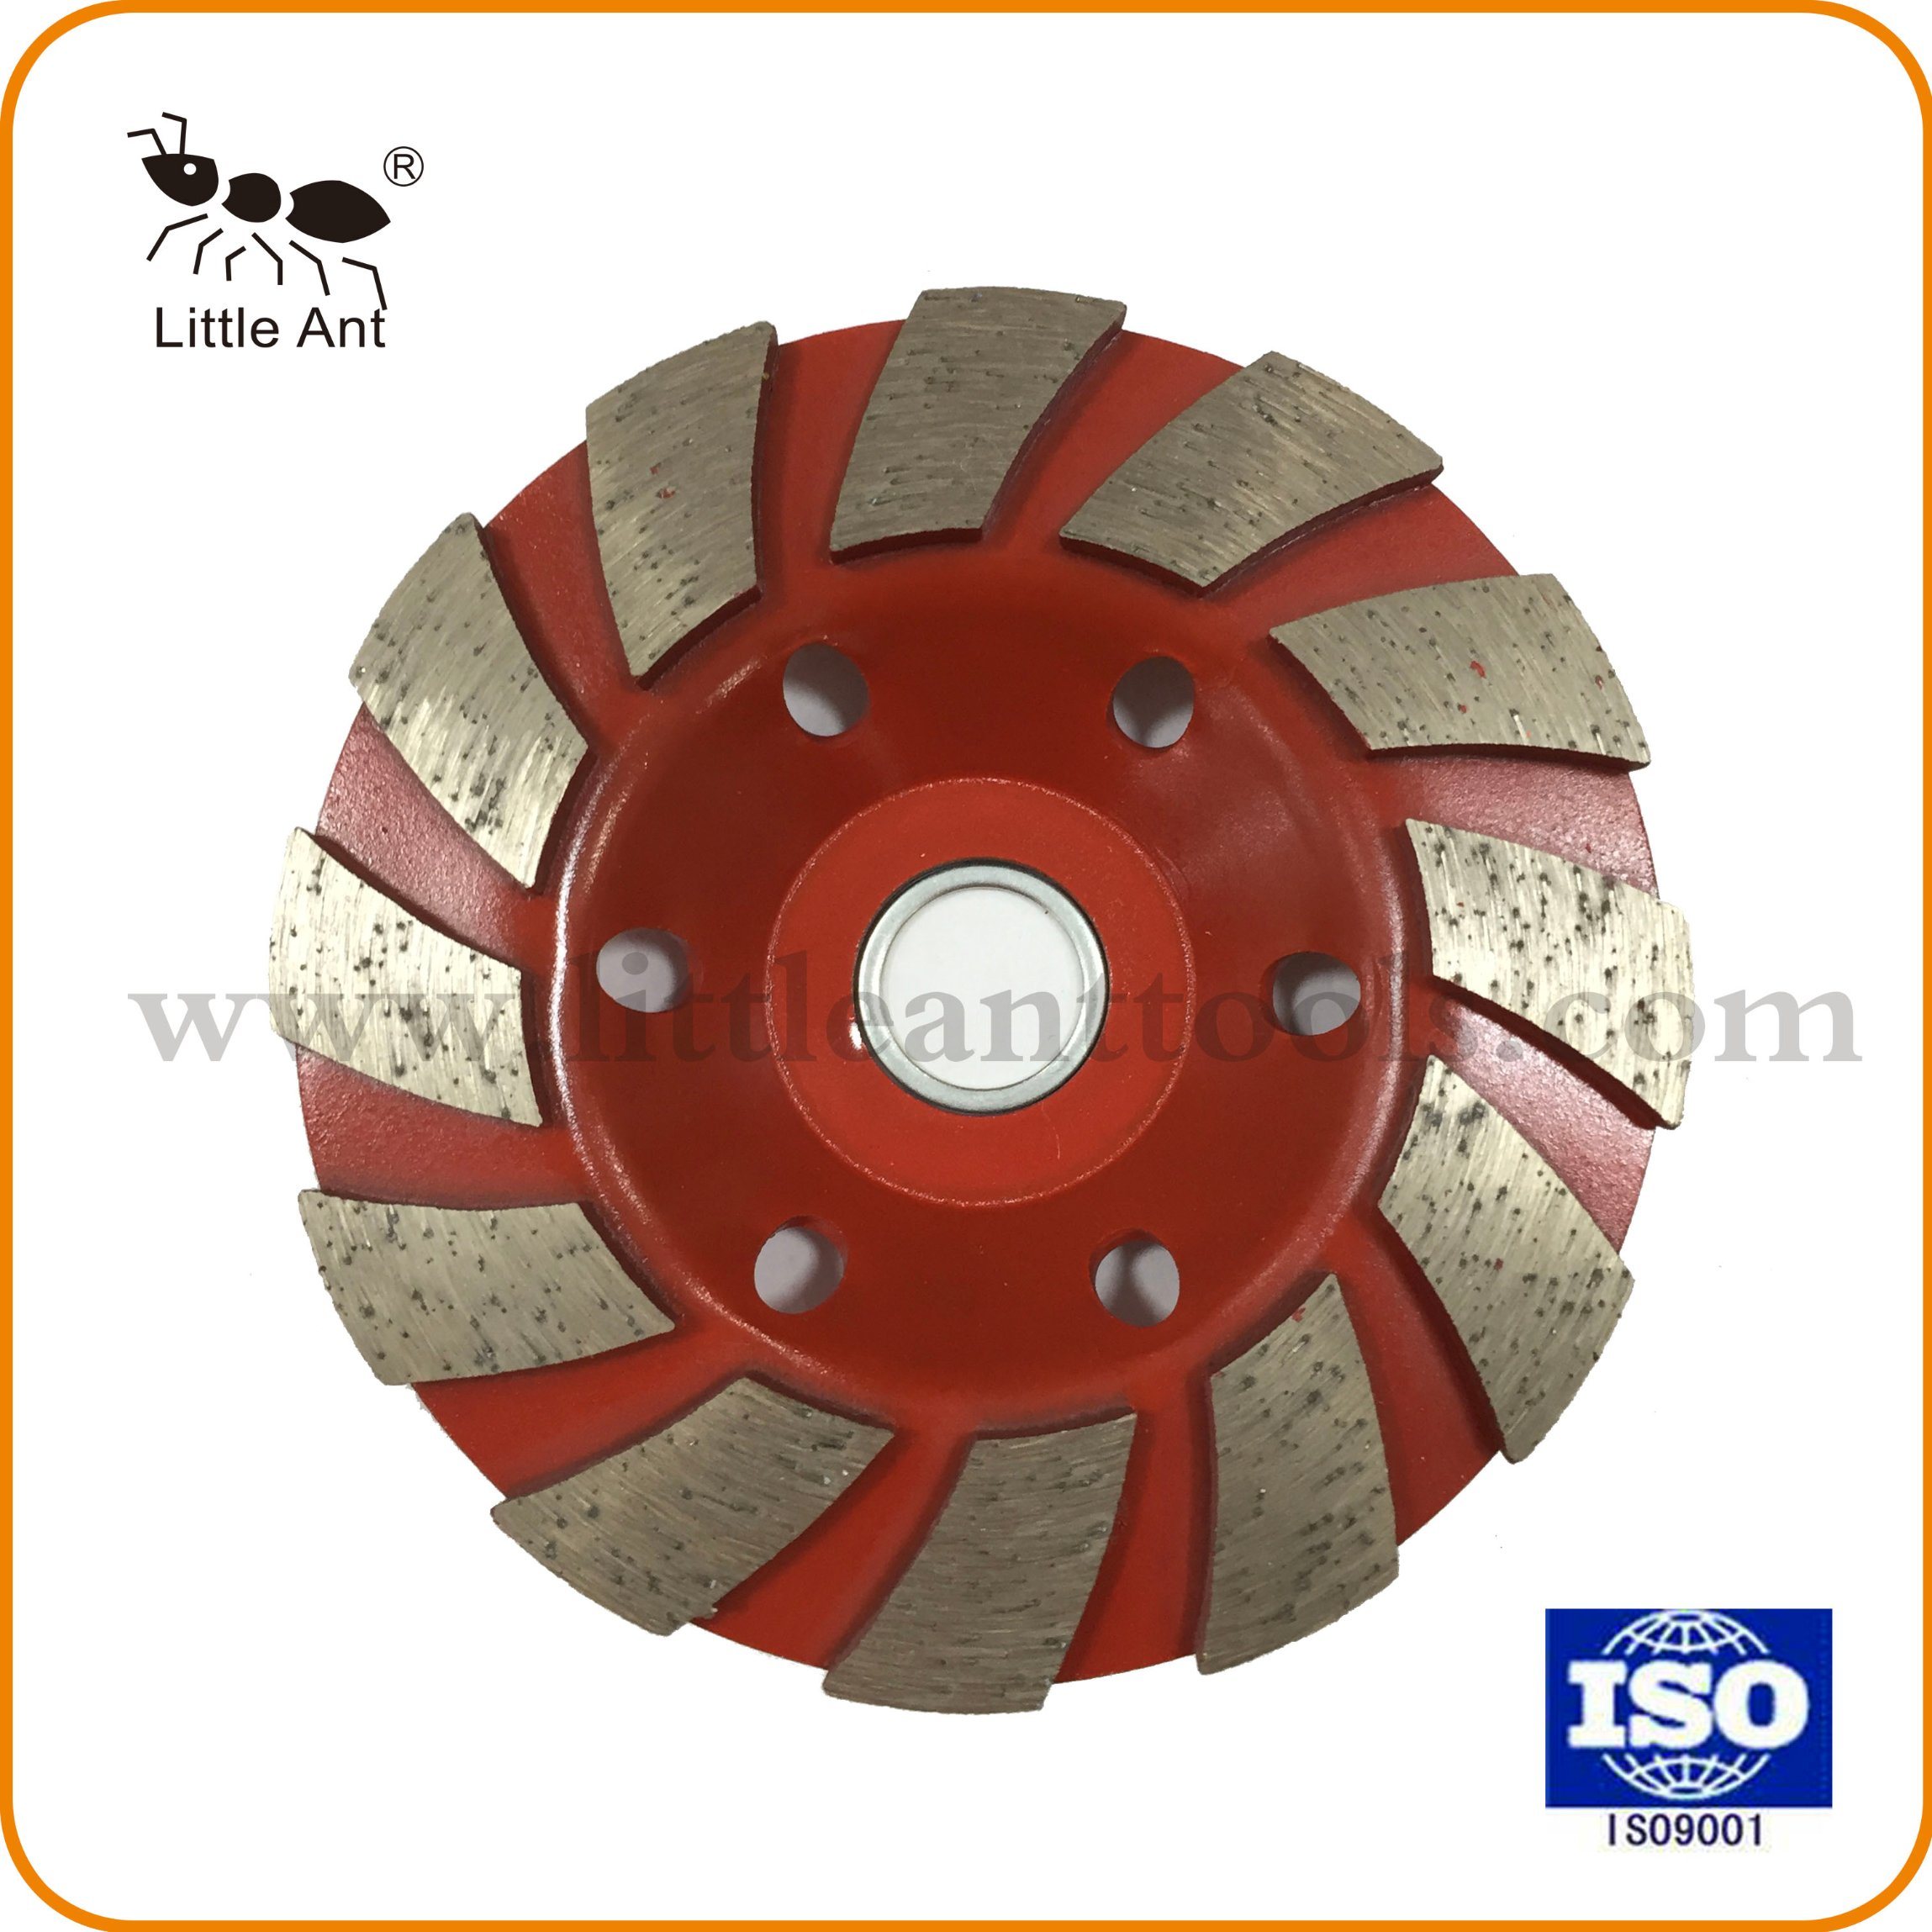 Hot Selling Diamond Cup Grinding Wheel for Concrete